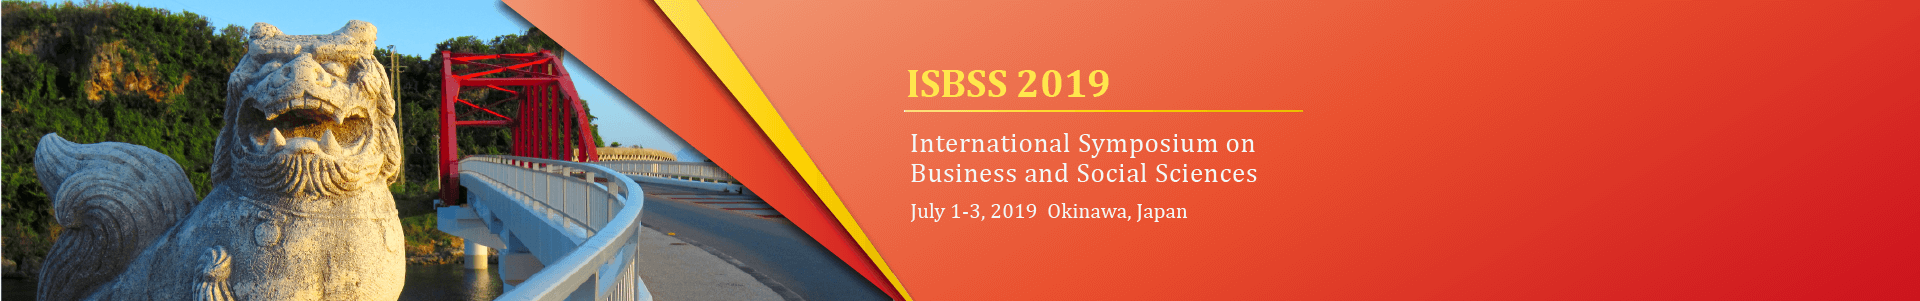 ISBSS 2019  International Symposium on Business and Social Sciences, Okinawa, Japan